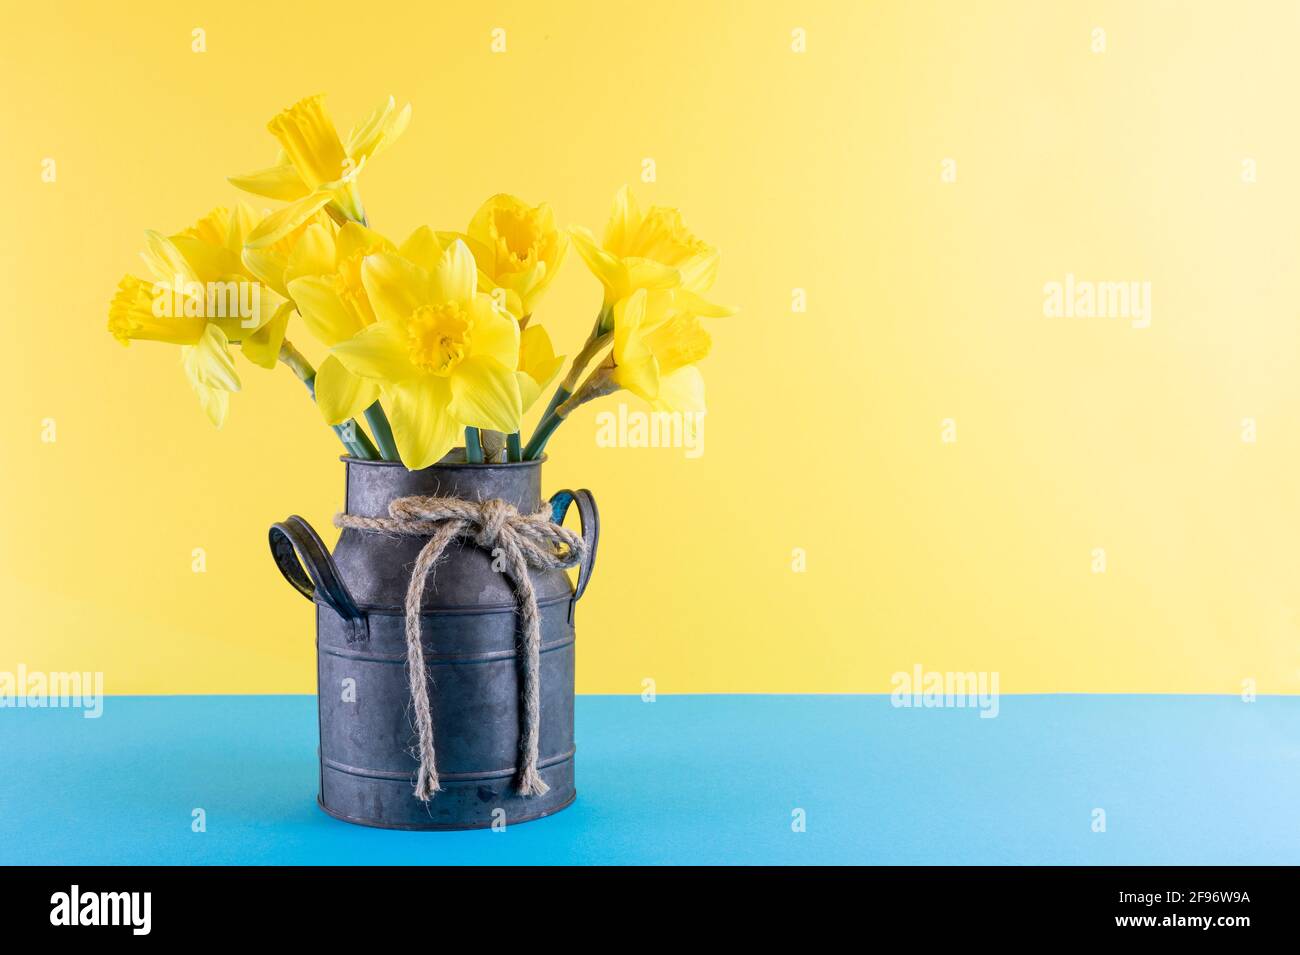 Fresh spring bright yellow daffodils flowers in metal pot on blue and yellow background. Copy space. Stock Photo